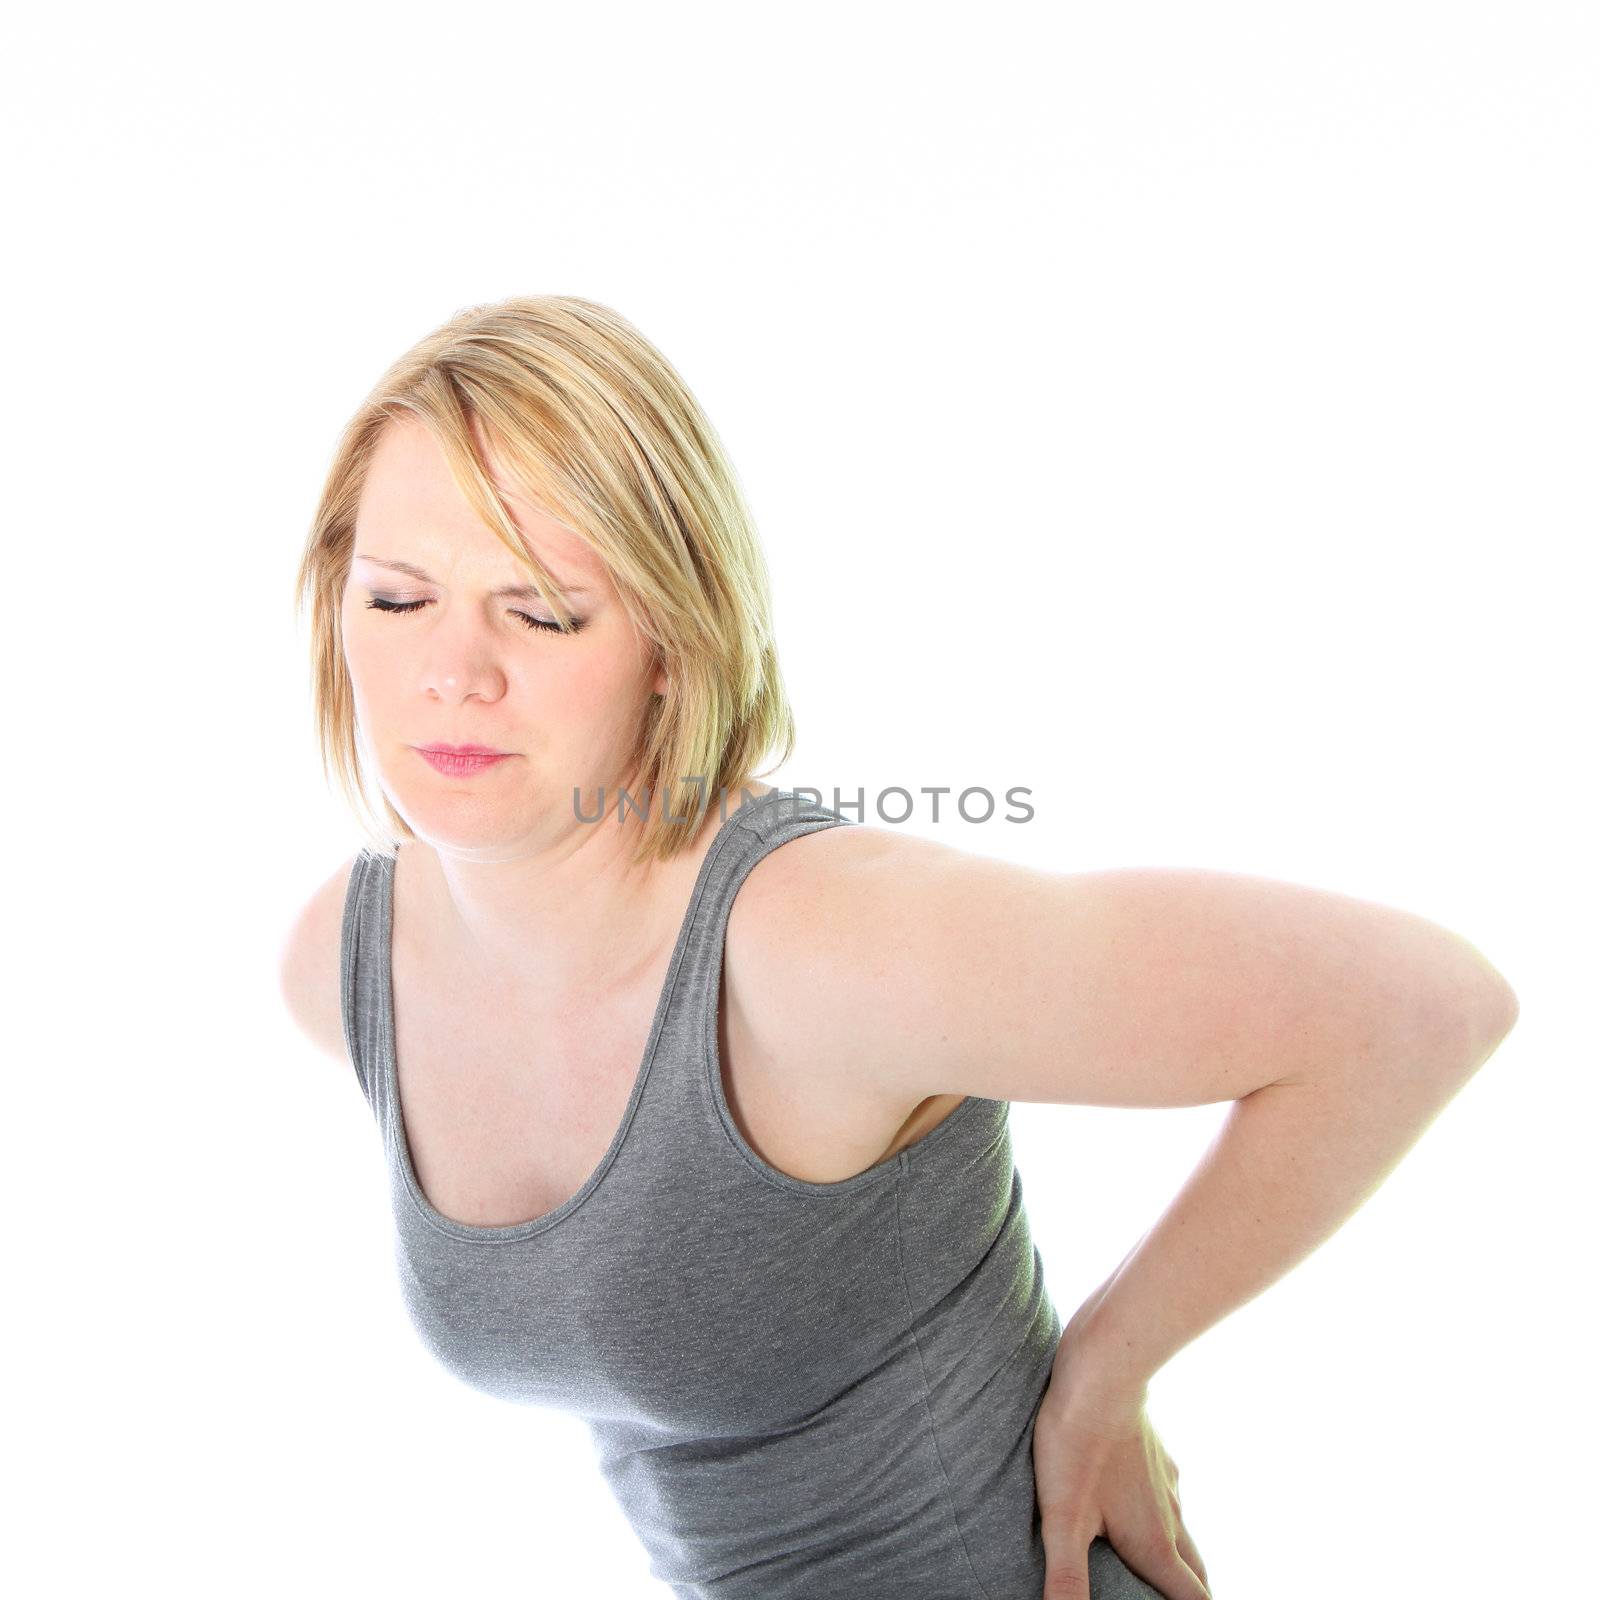 Young woman with back pain by Farina6000